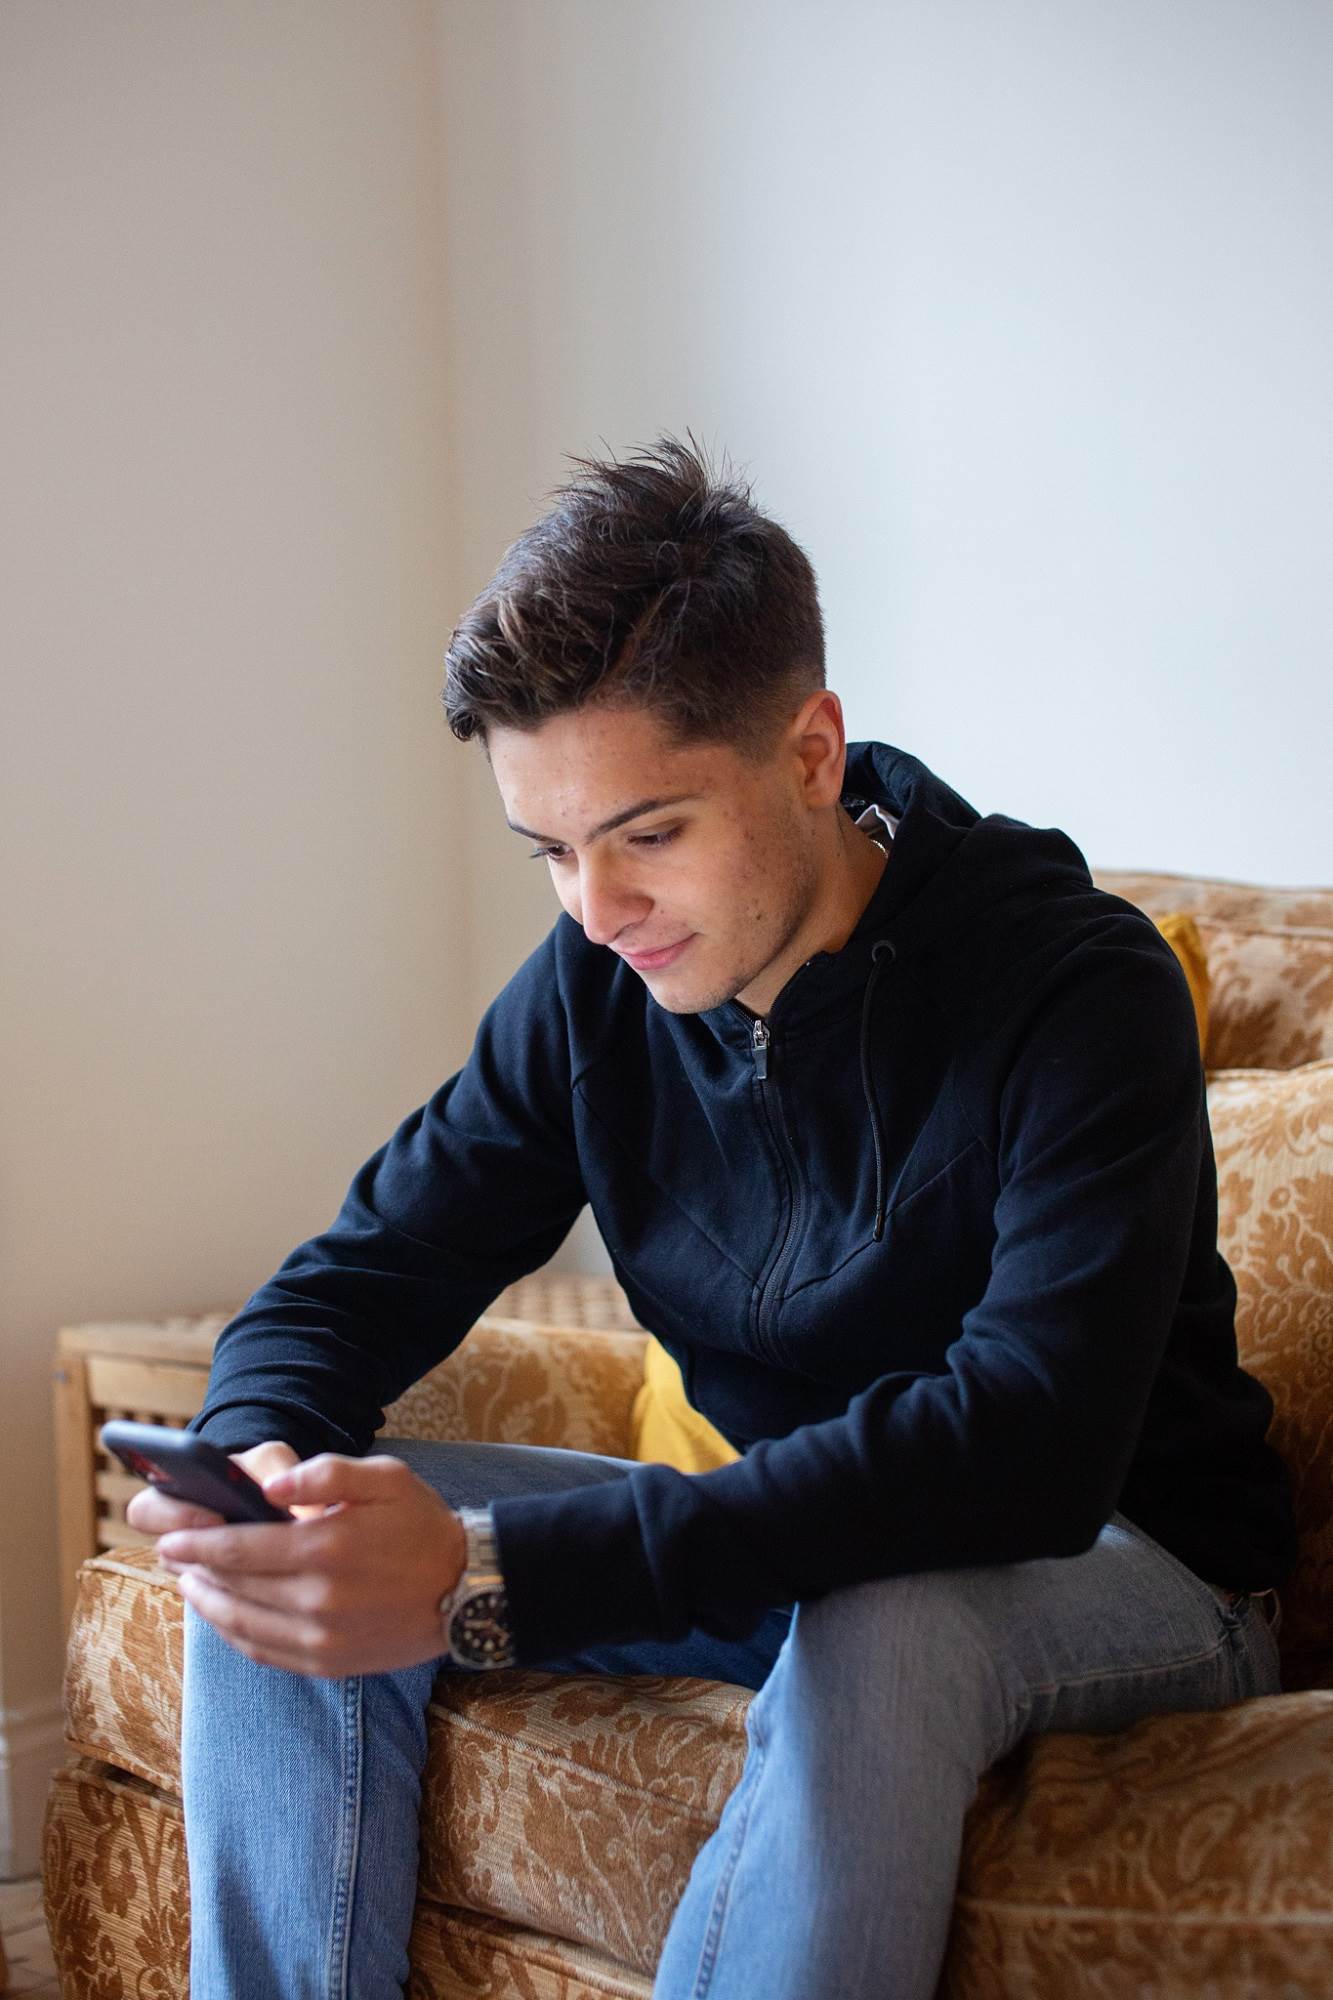 Teen Boy Smiling Looking At Mobile Content Sat On Sofa